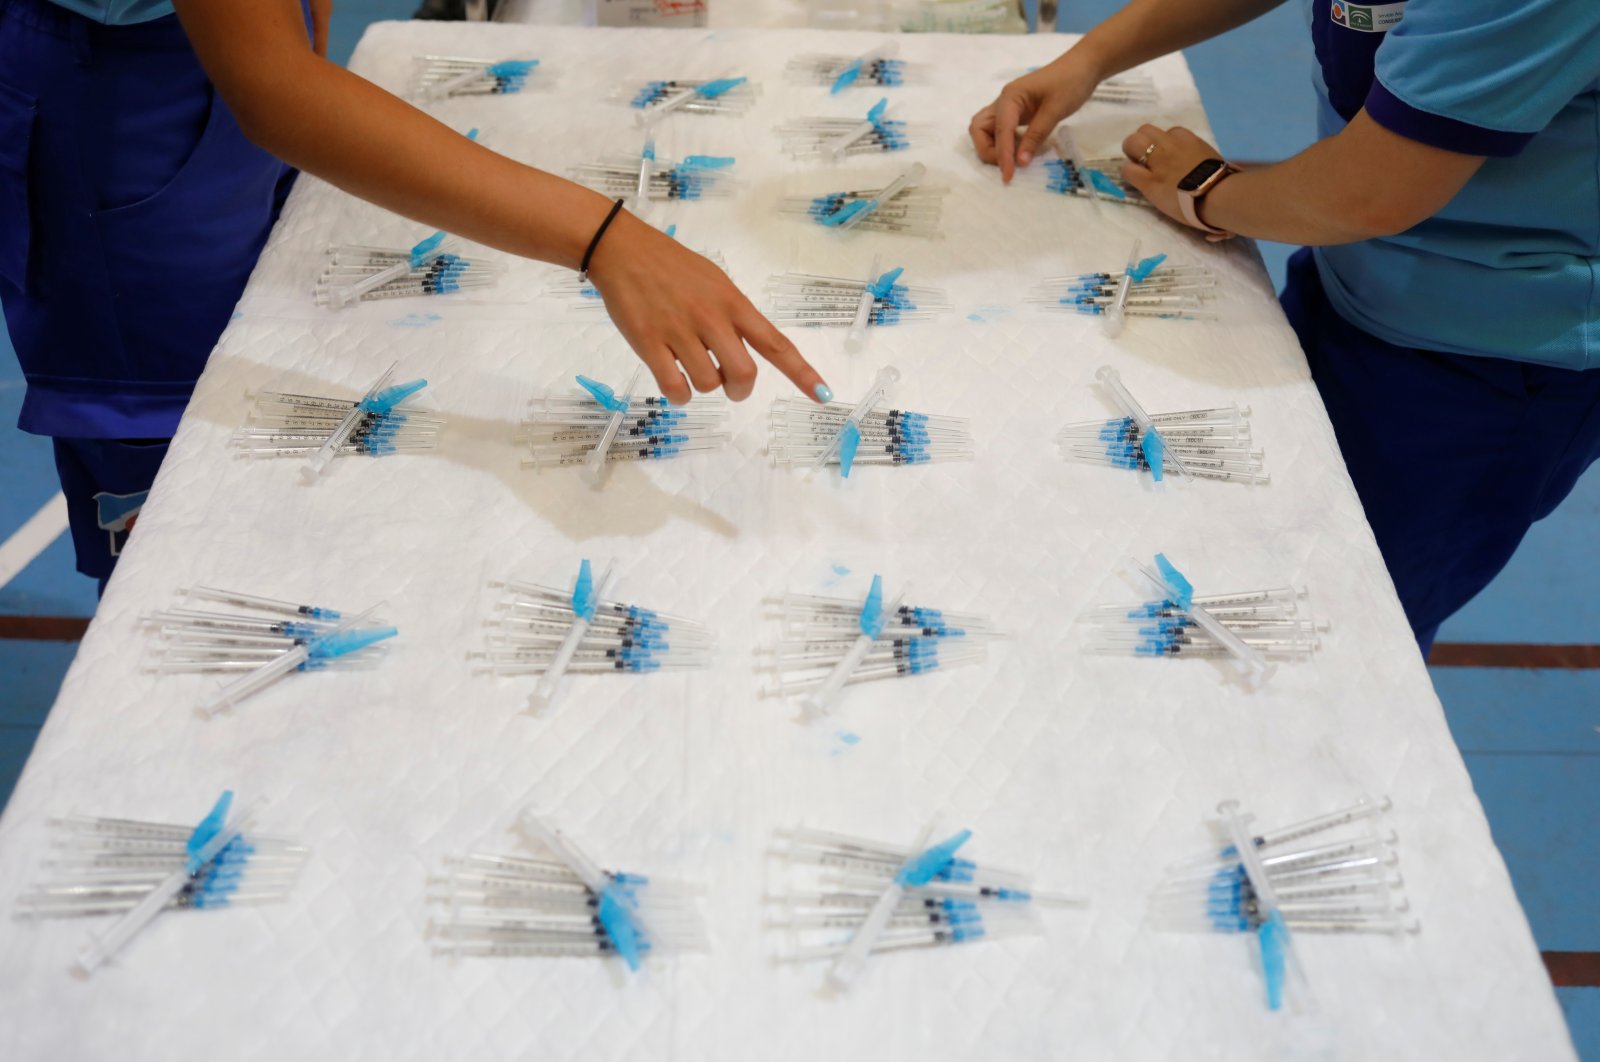 Healthcare workers prepare syringes to be filled with the Pfizer-BioNTech COVID-19 vaccine at a vaccination center in Ronda, Spain, June 30, 2021. (Reuters Photo)